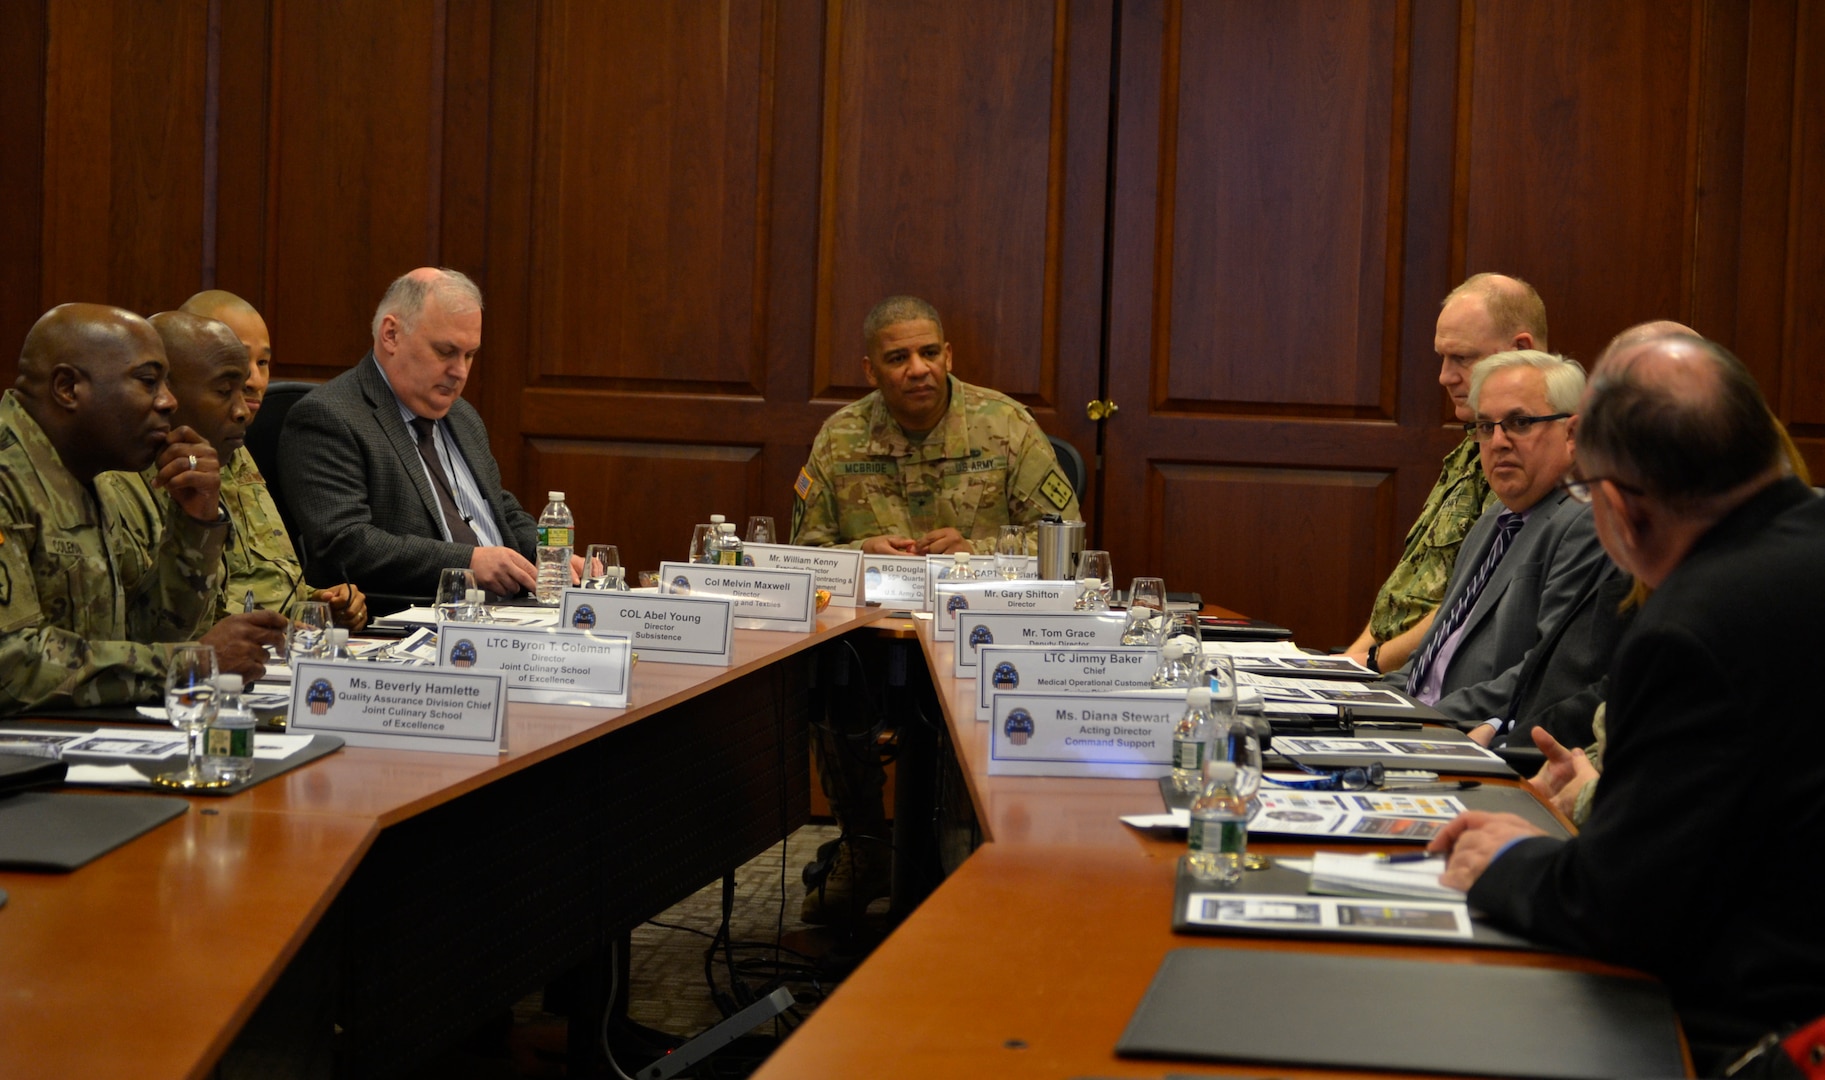 Army Quartermaster General Brig. Gen. Douglas McBride, Jr., center, met with supply chain senior leaders at DLA Troop Support in Philadelphia on March 4, 2019. McBride received a mission overview brief about Troop Support and its five supply chains during his visit. Photo by Alexandria Brimage-Gray